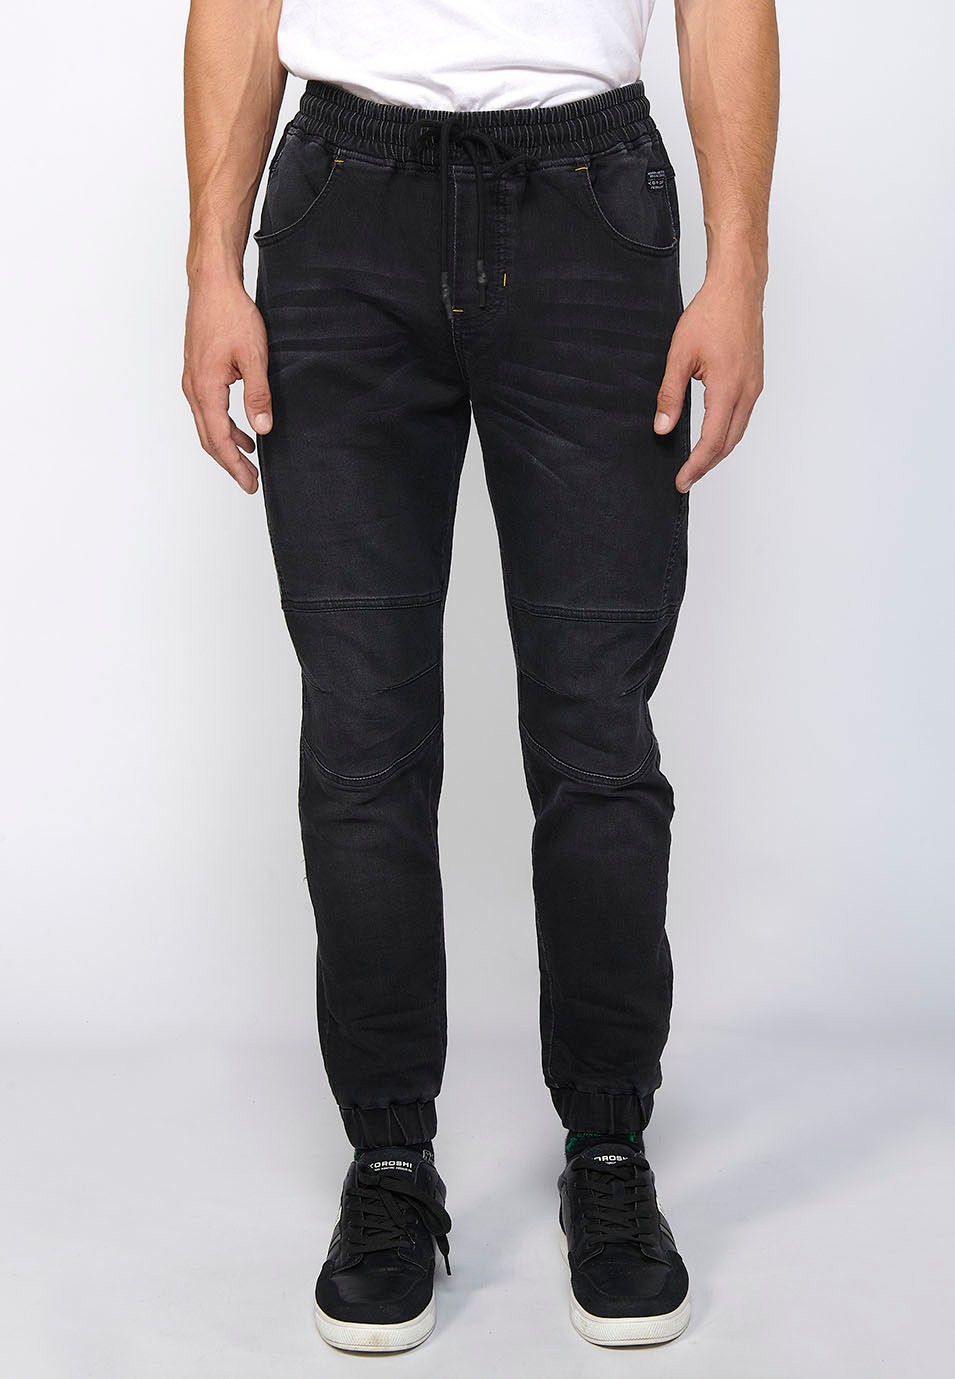 Long slim jogger pants fitted at the ankles with adjustable elastic waist and drawstring in Black for Men 4